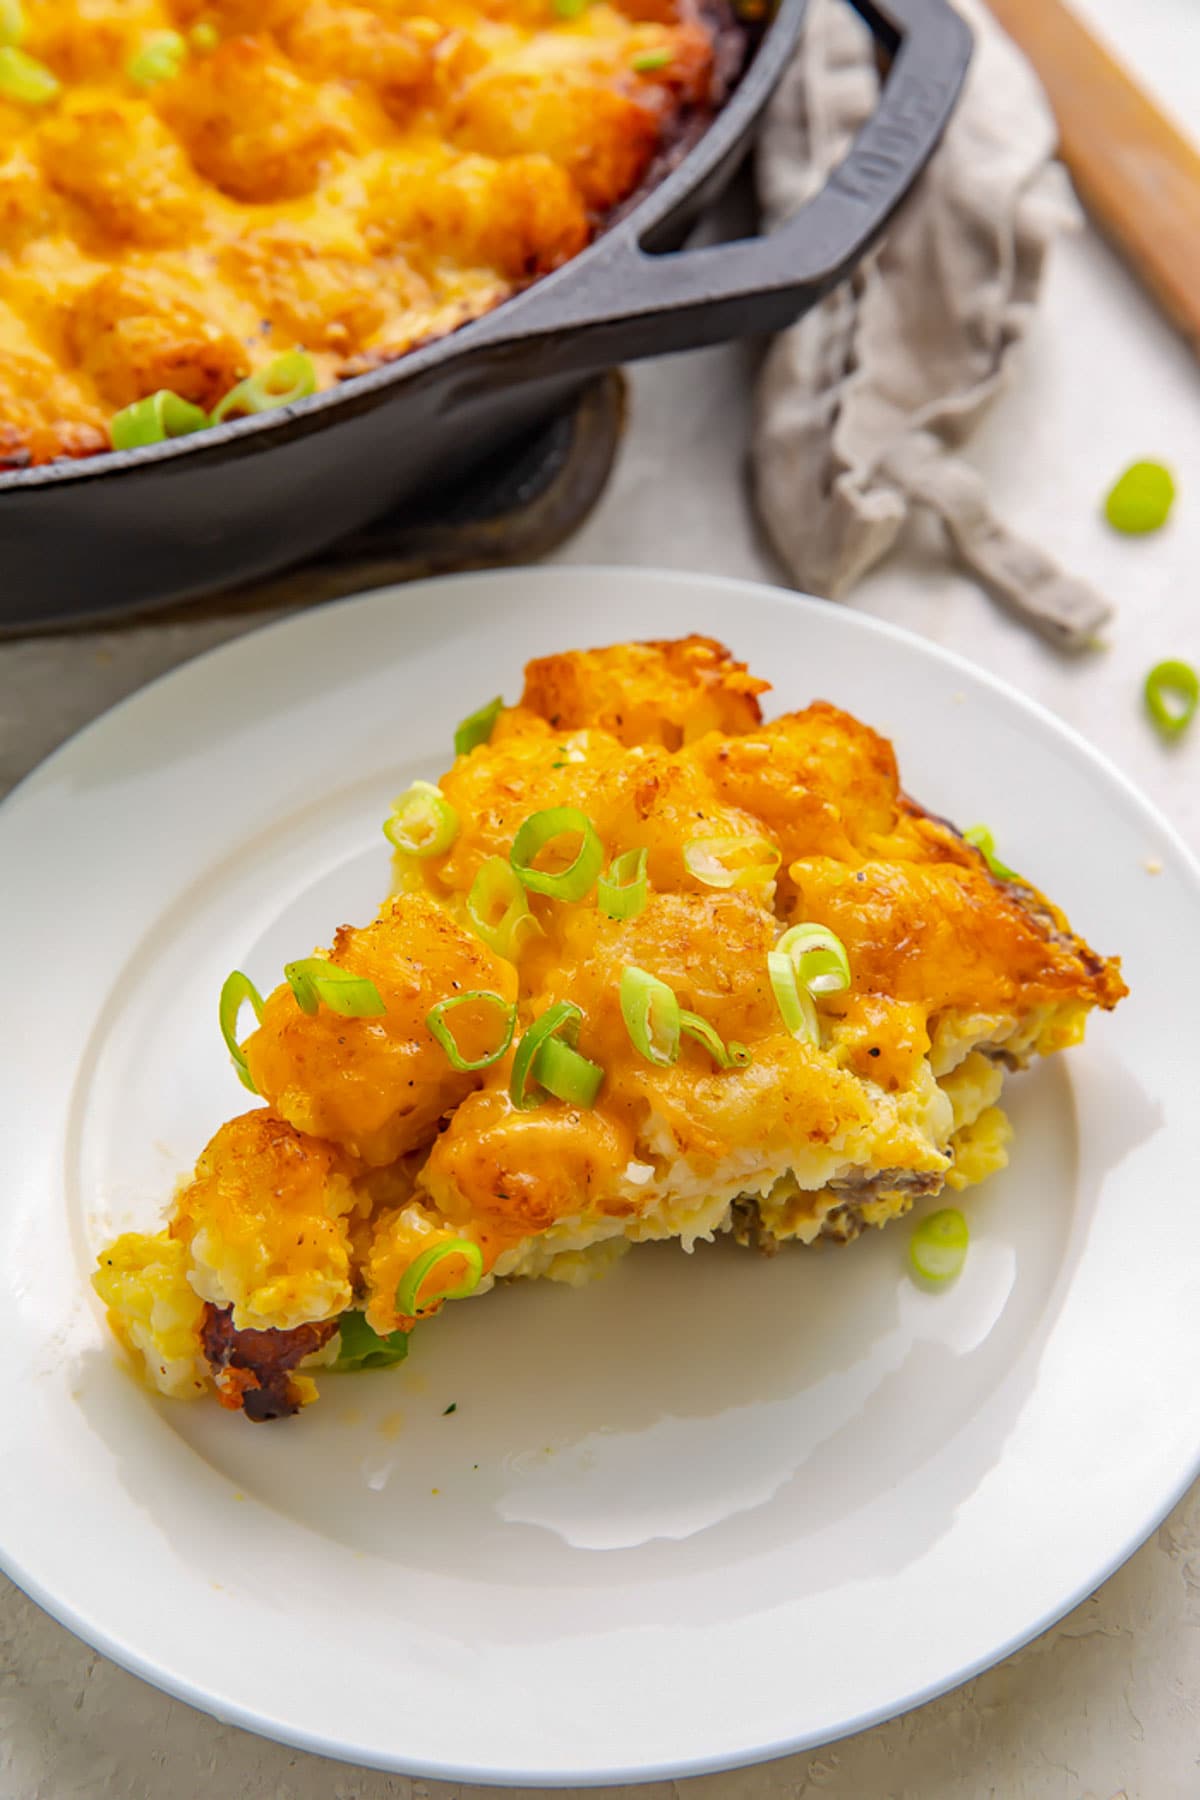 A triangular wedge of tater tot breakfast casserole on a white plate.